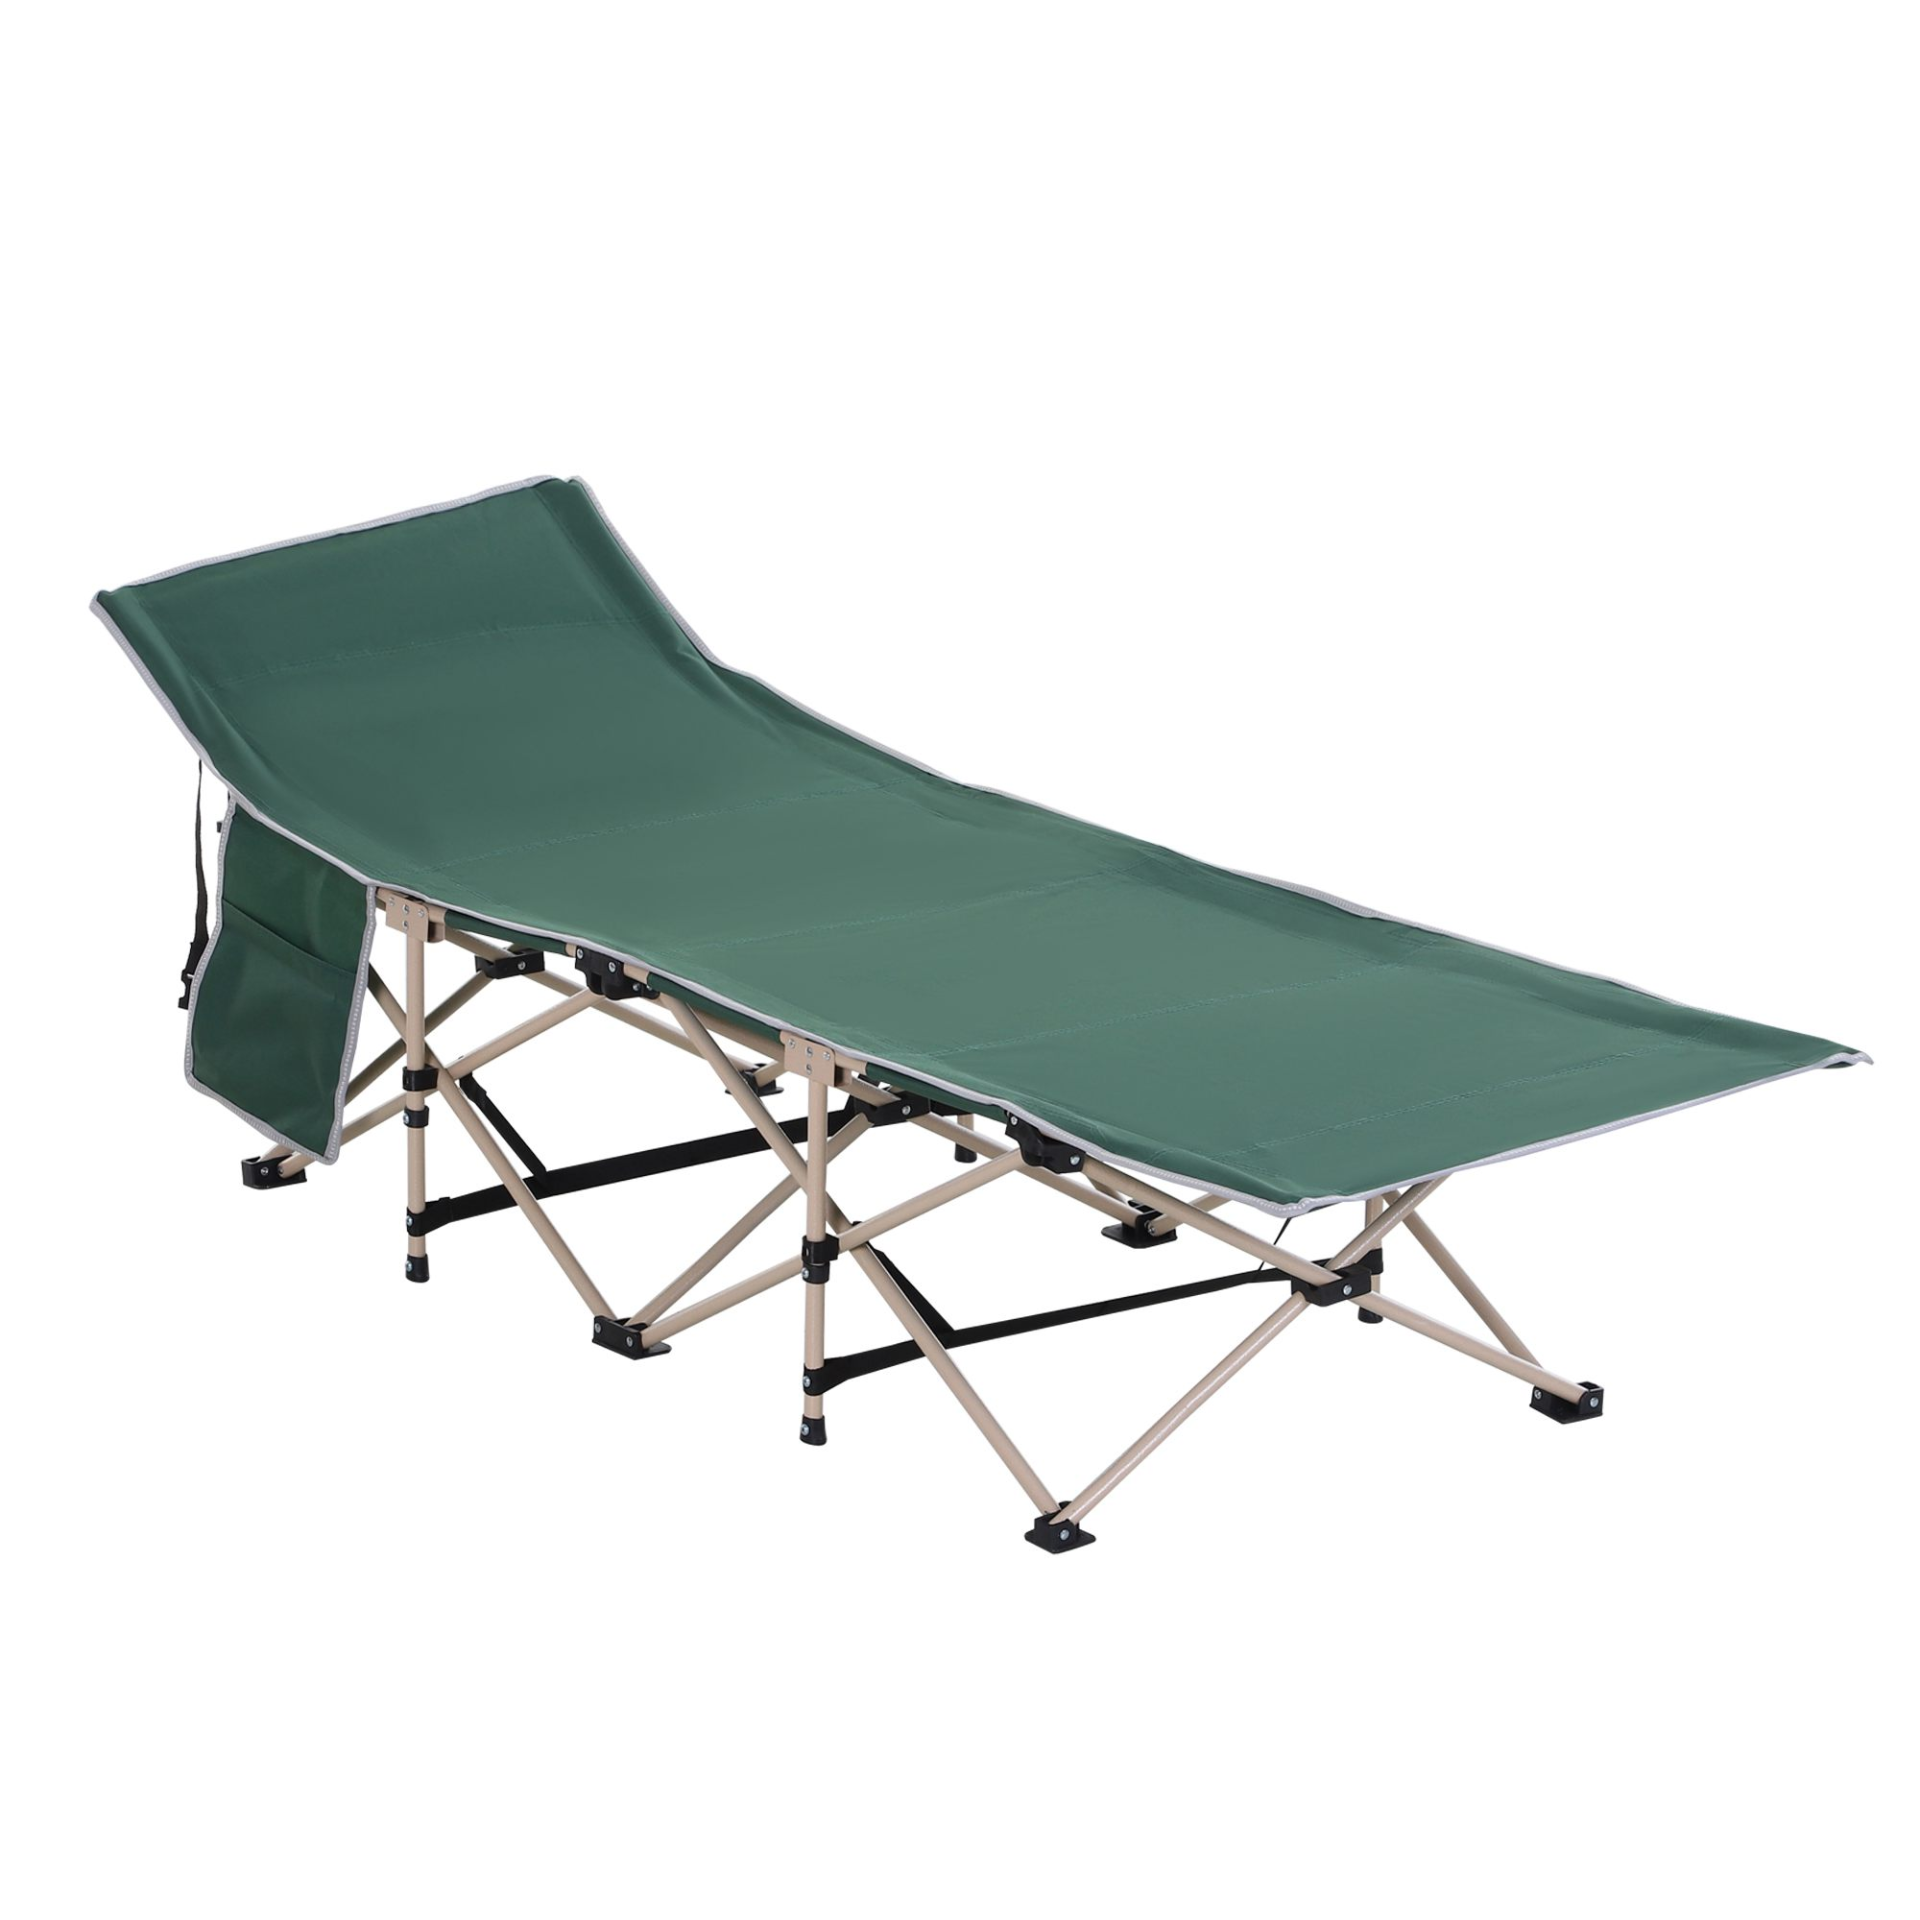 Outsunny Single Person Camping Bed Folding Cot - Green | Portable Military Sleeping Bed for Outdoor Adventures Sleeping Mats and Airbeds Cosy Camping Co. Green  